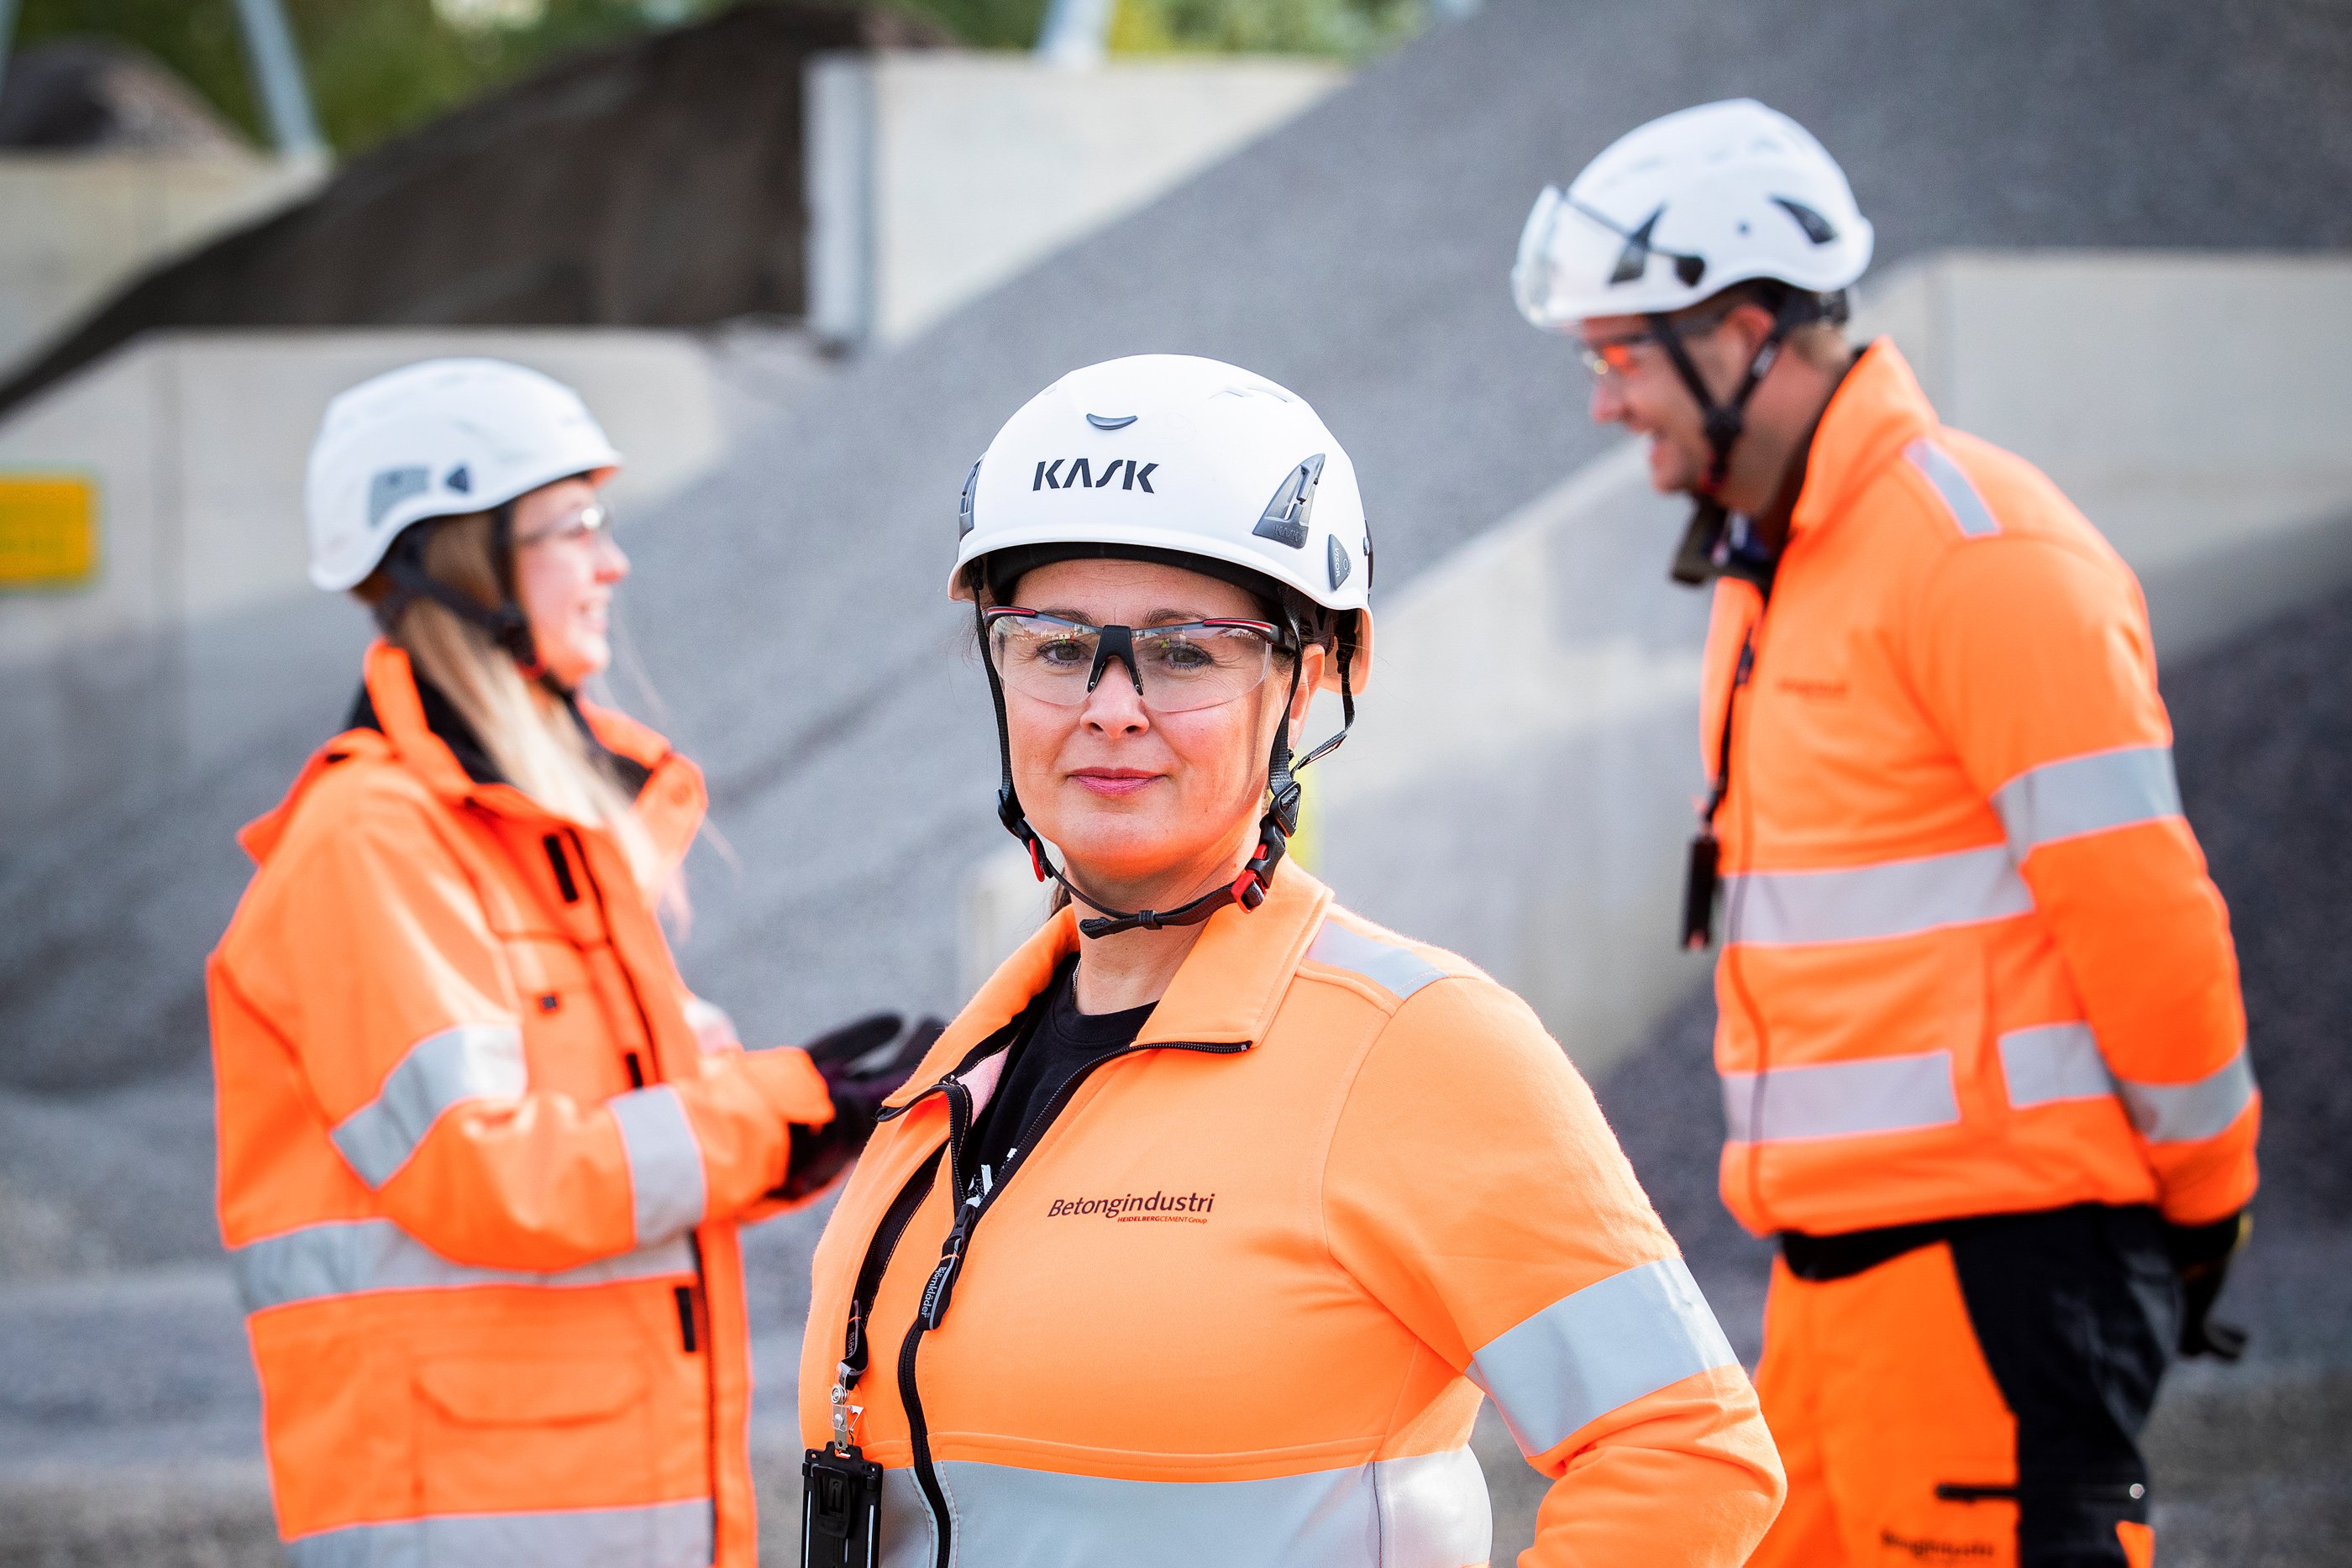 Employees wearing white helmets and orange vests